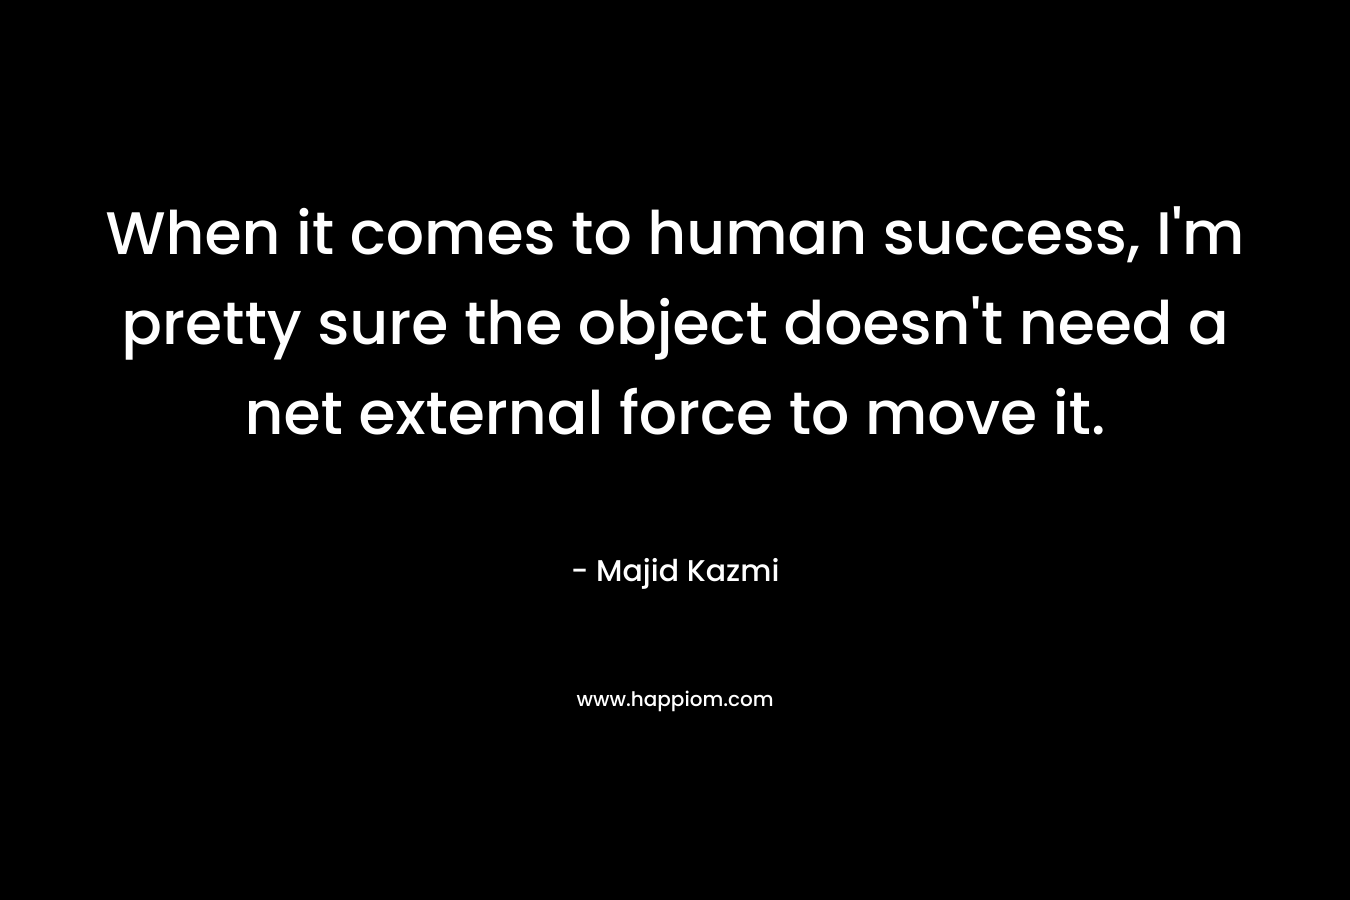 When it comes to human success, I'm pretty sure the object doesn't need a net external force to move it.